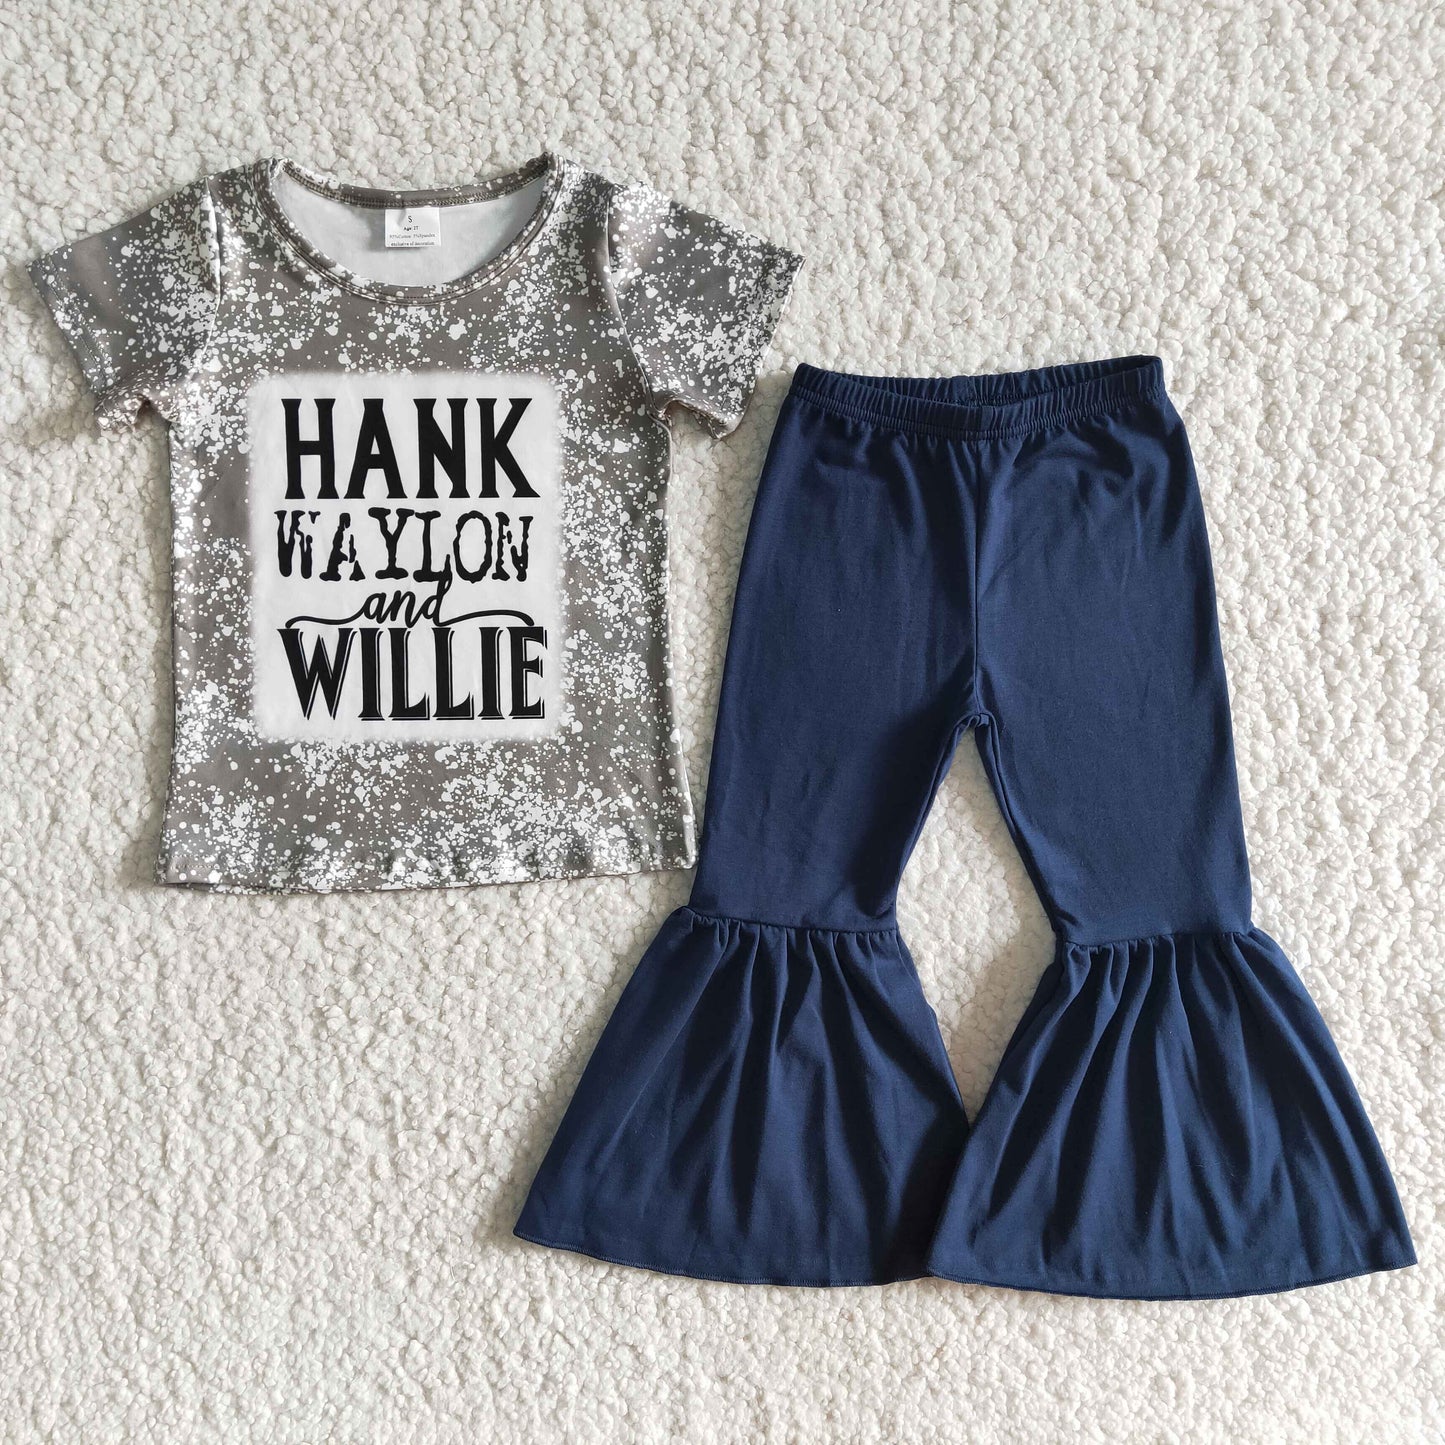 Hank Waylon and Willie Girls Boutique Outfit